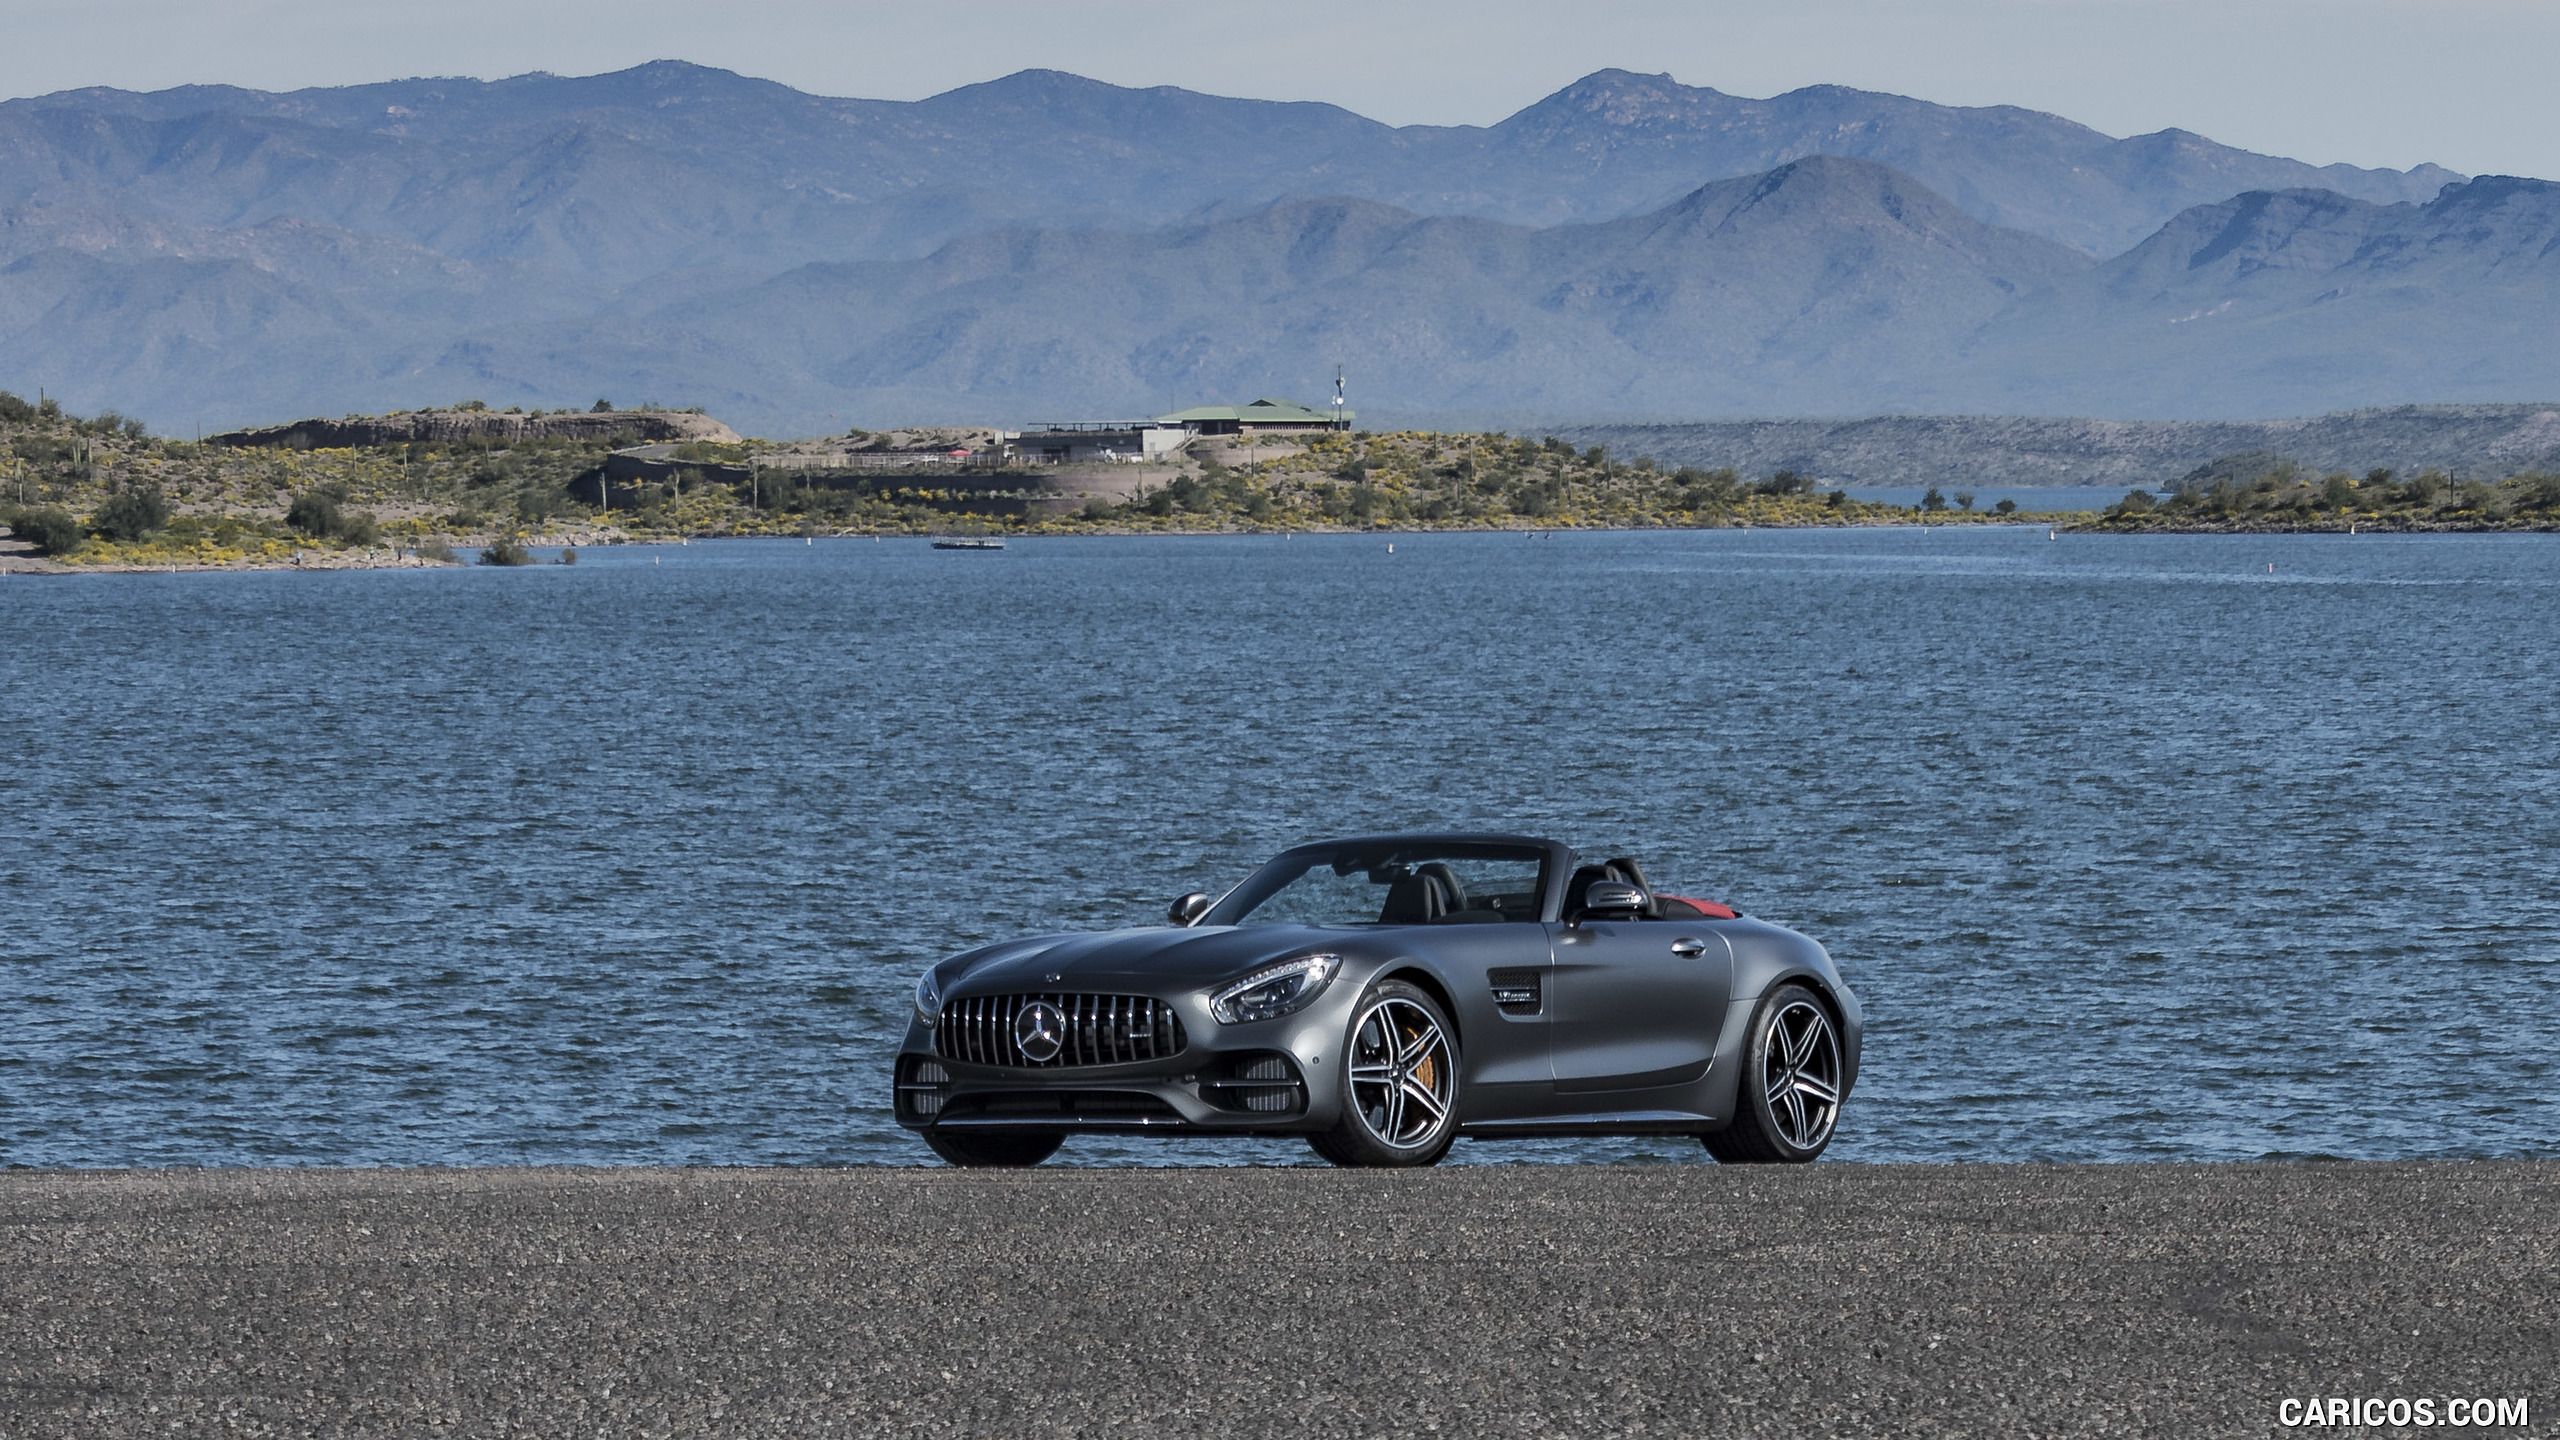 2018 Mercedes-AMG GT C Roadster - Front Three-Quarter, #310 of 350